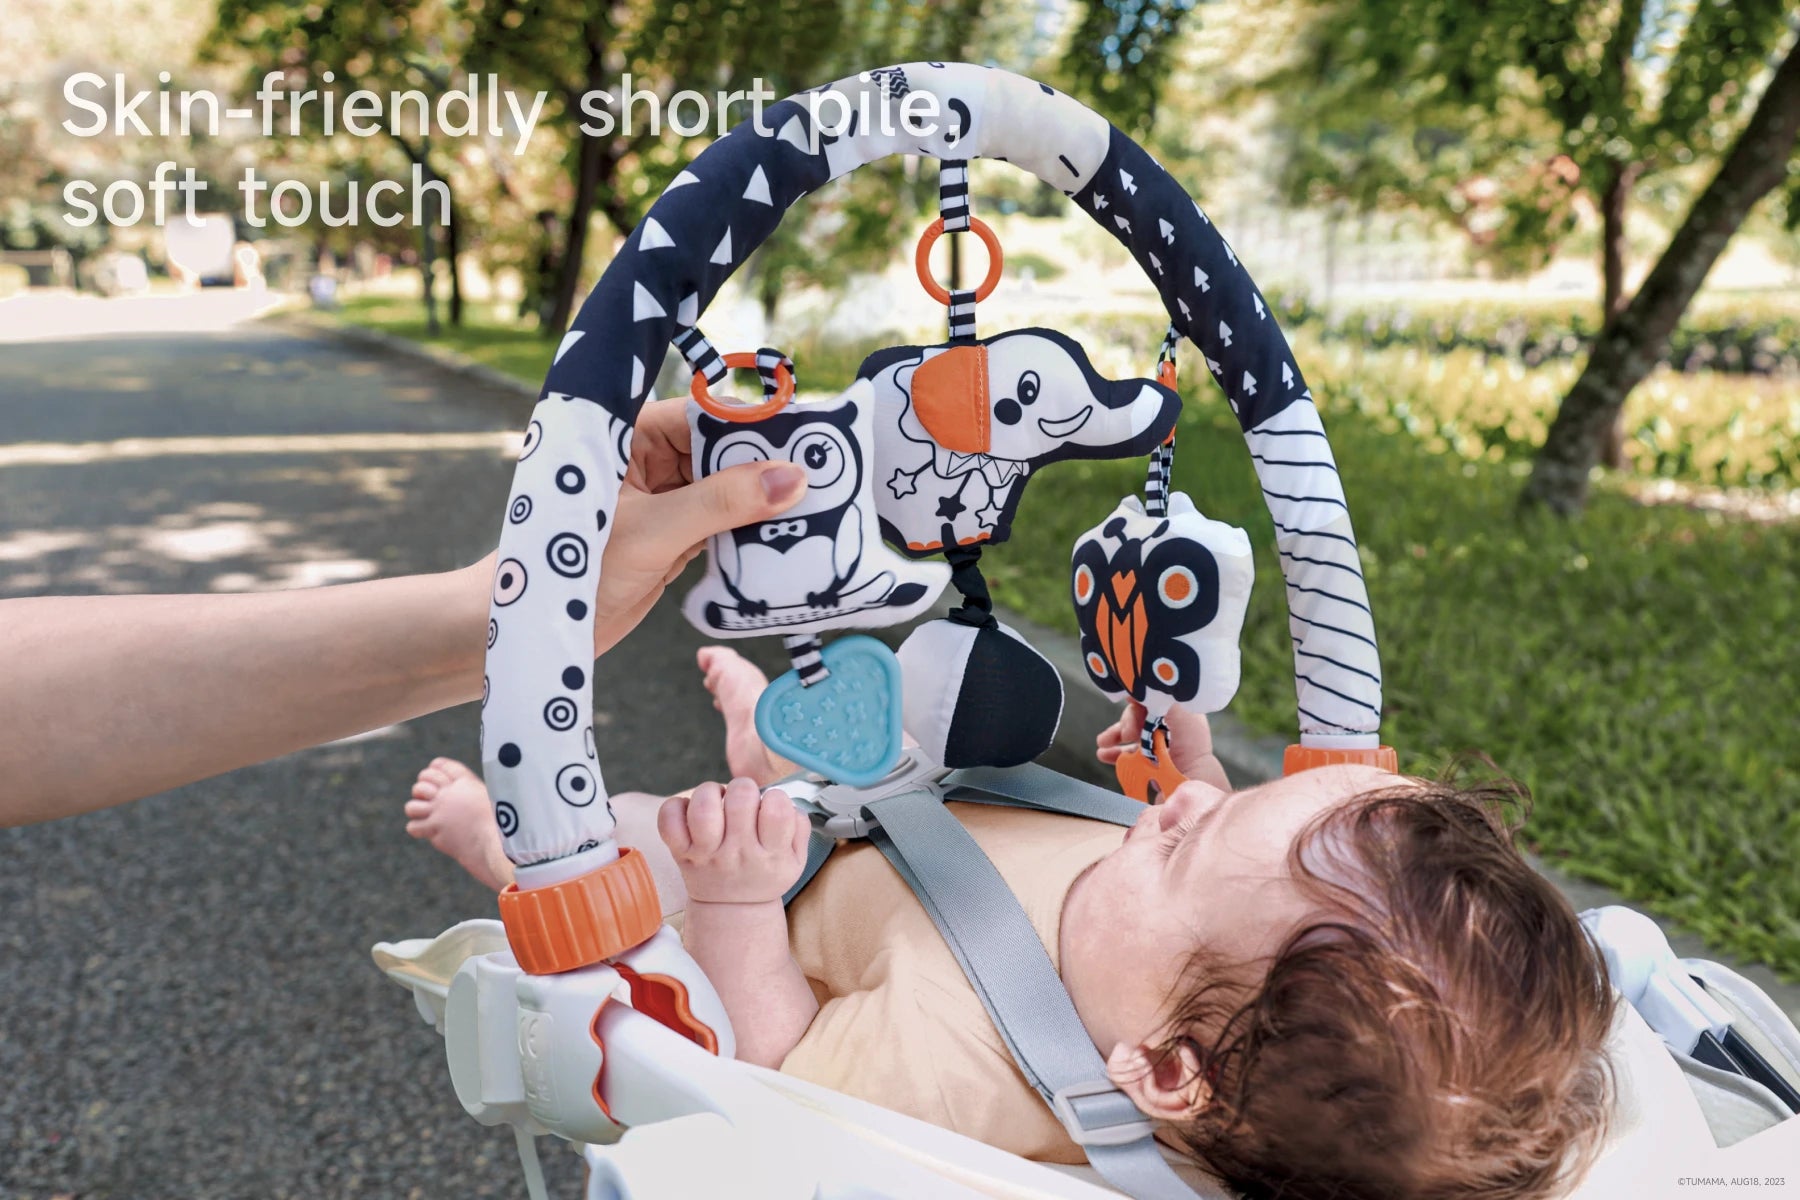 Portable mobile for bassinet with travel activity arch for versatile use